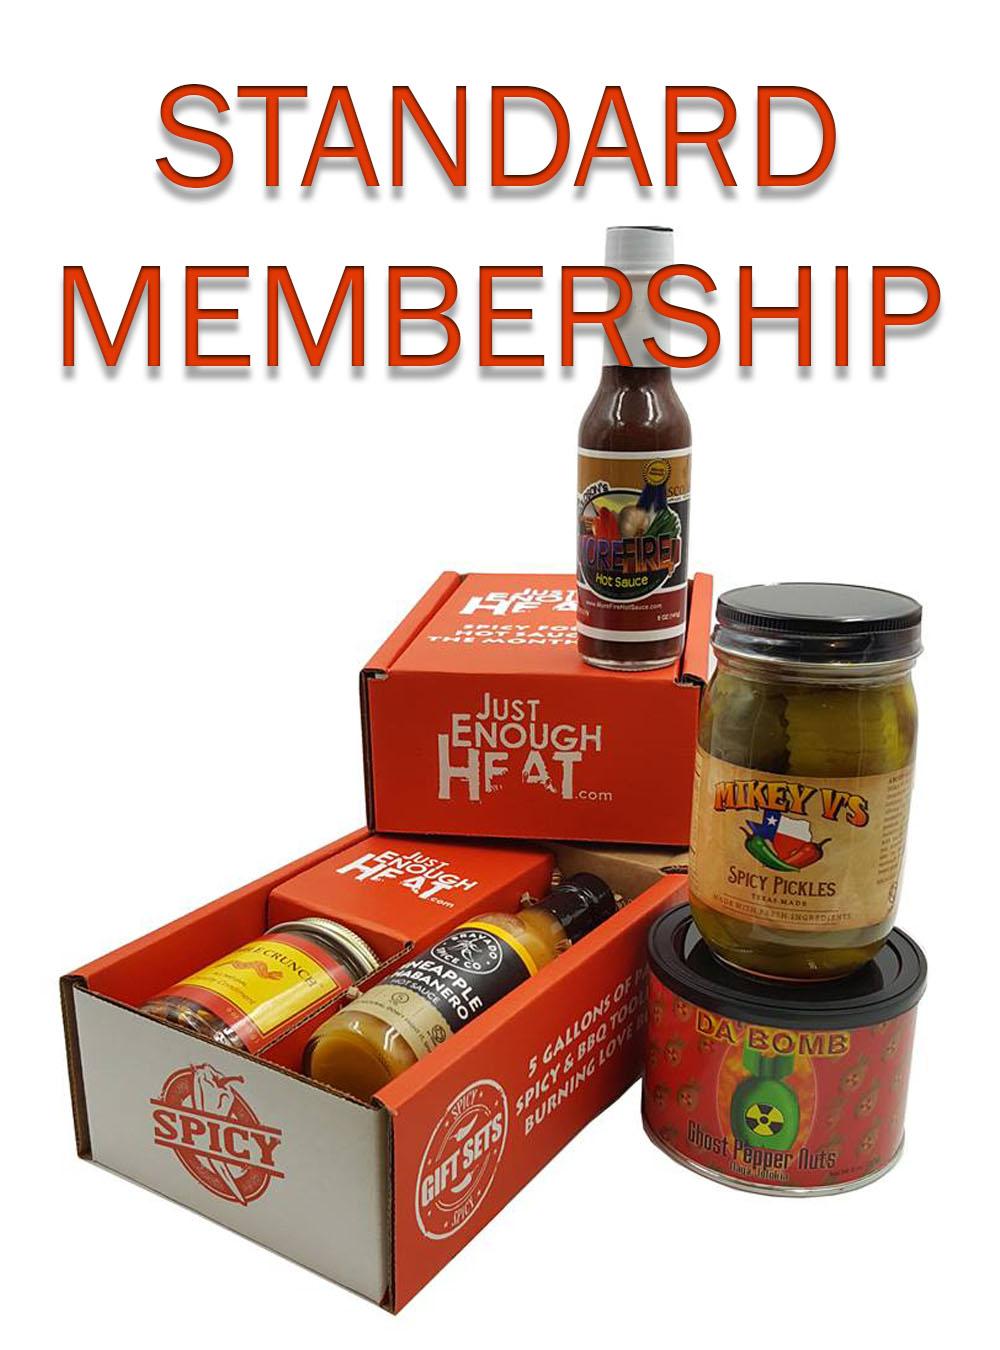 Hot Sauce Food Logo - Spicy Food & Hot Sauce of the Month Club - Just Enough Heat